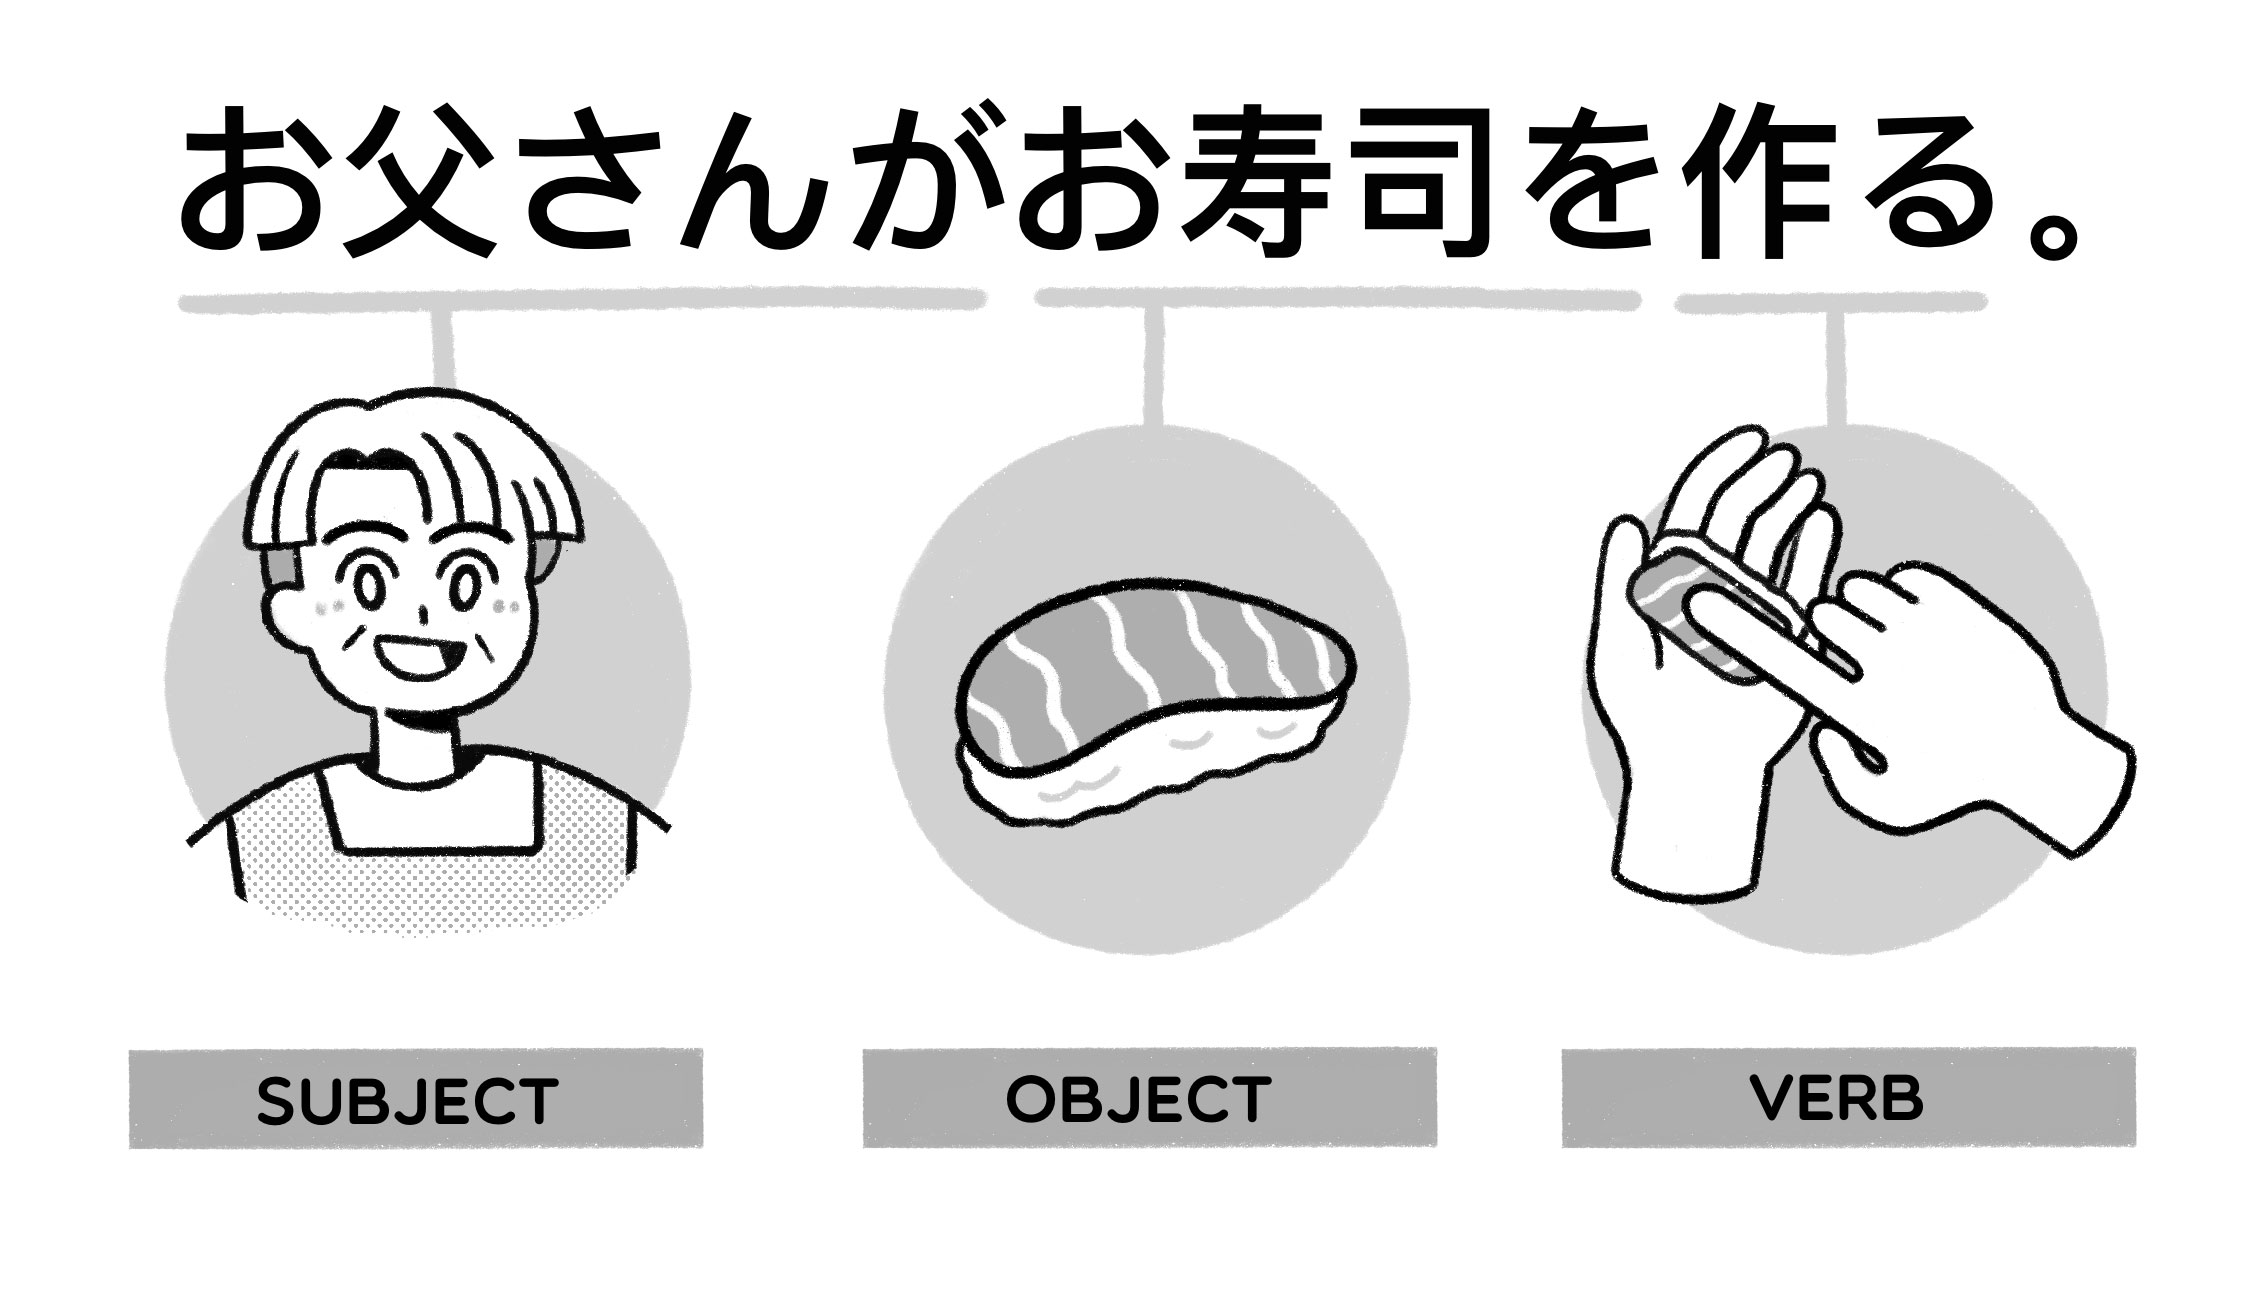 a subject, an object, a verb for a Japanese sentence お父さんが寿司を作る